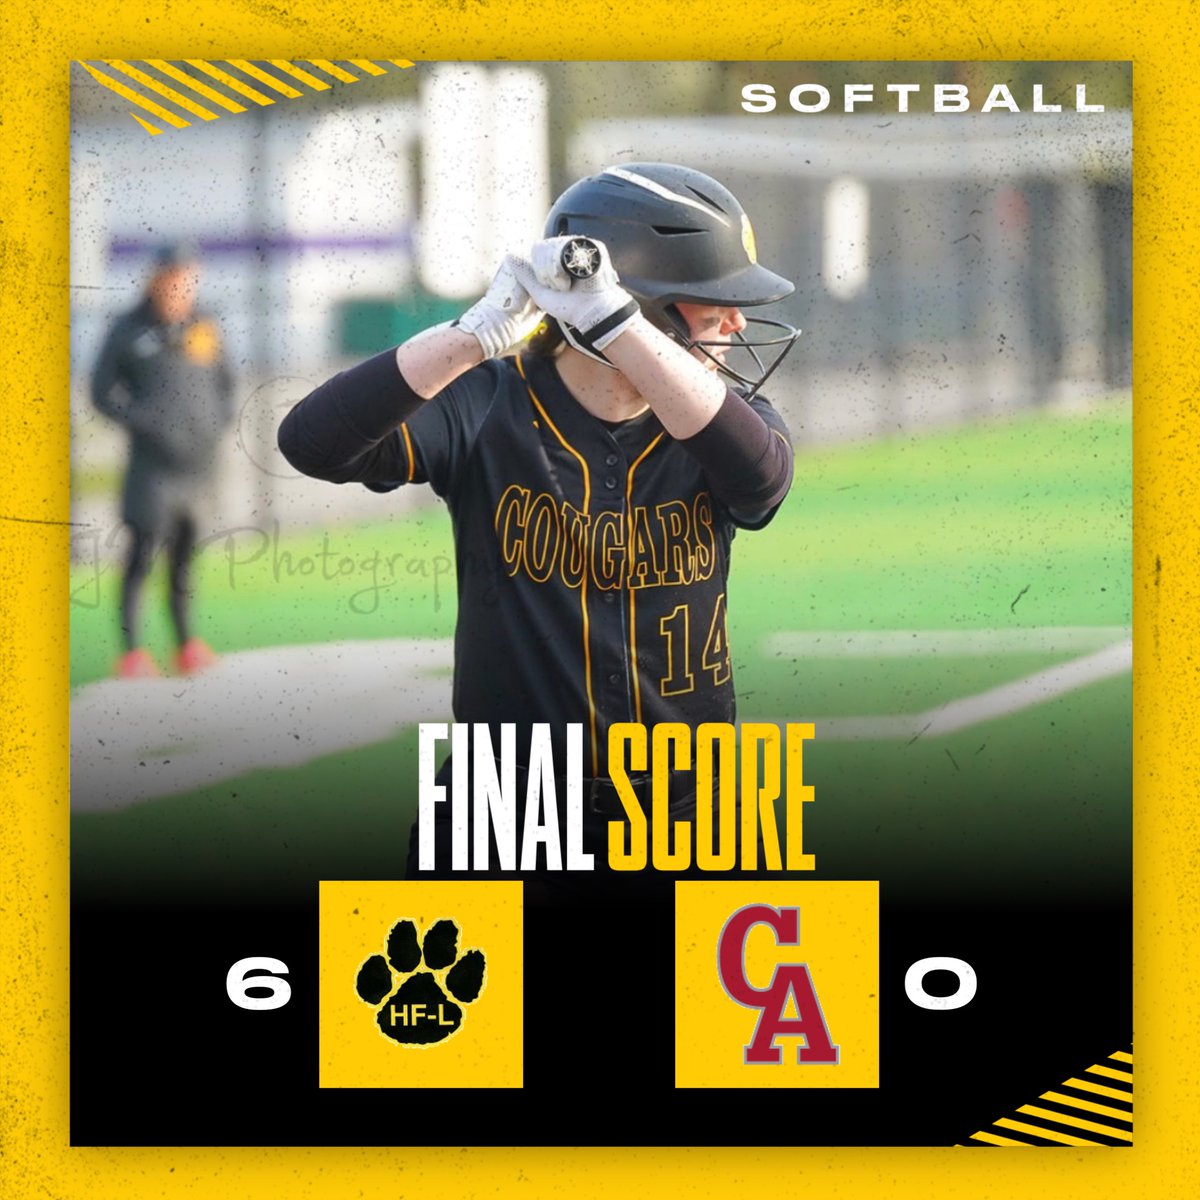 Softball took home the win against Canandaigua, 6-0. Maddy Schubach had an inside the park home run in the top of the 7th inning to extend the lead.
Great game ladies! #RollCougs